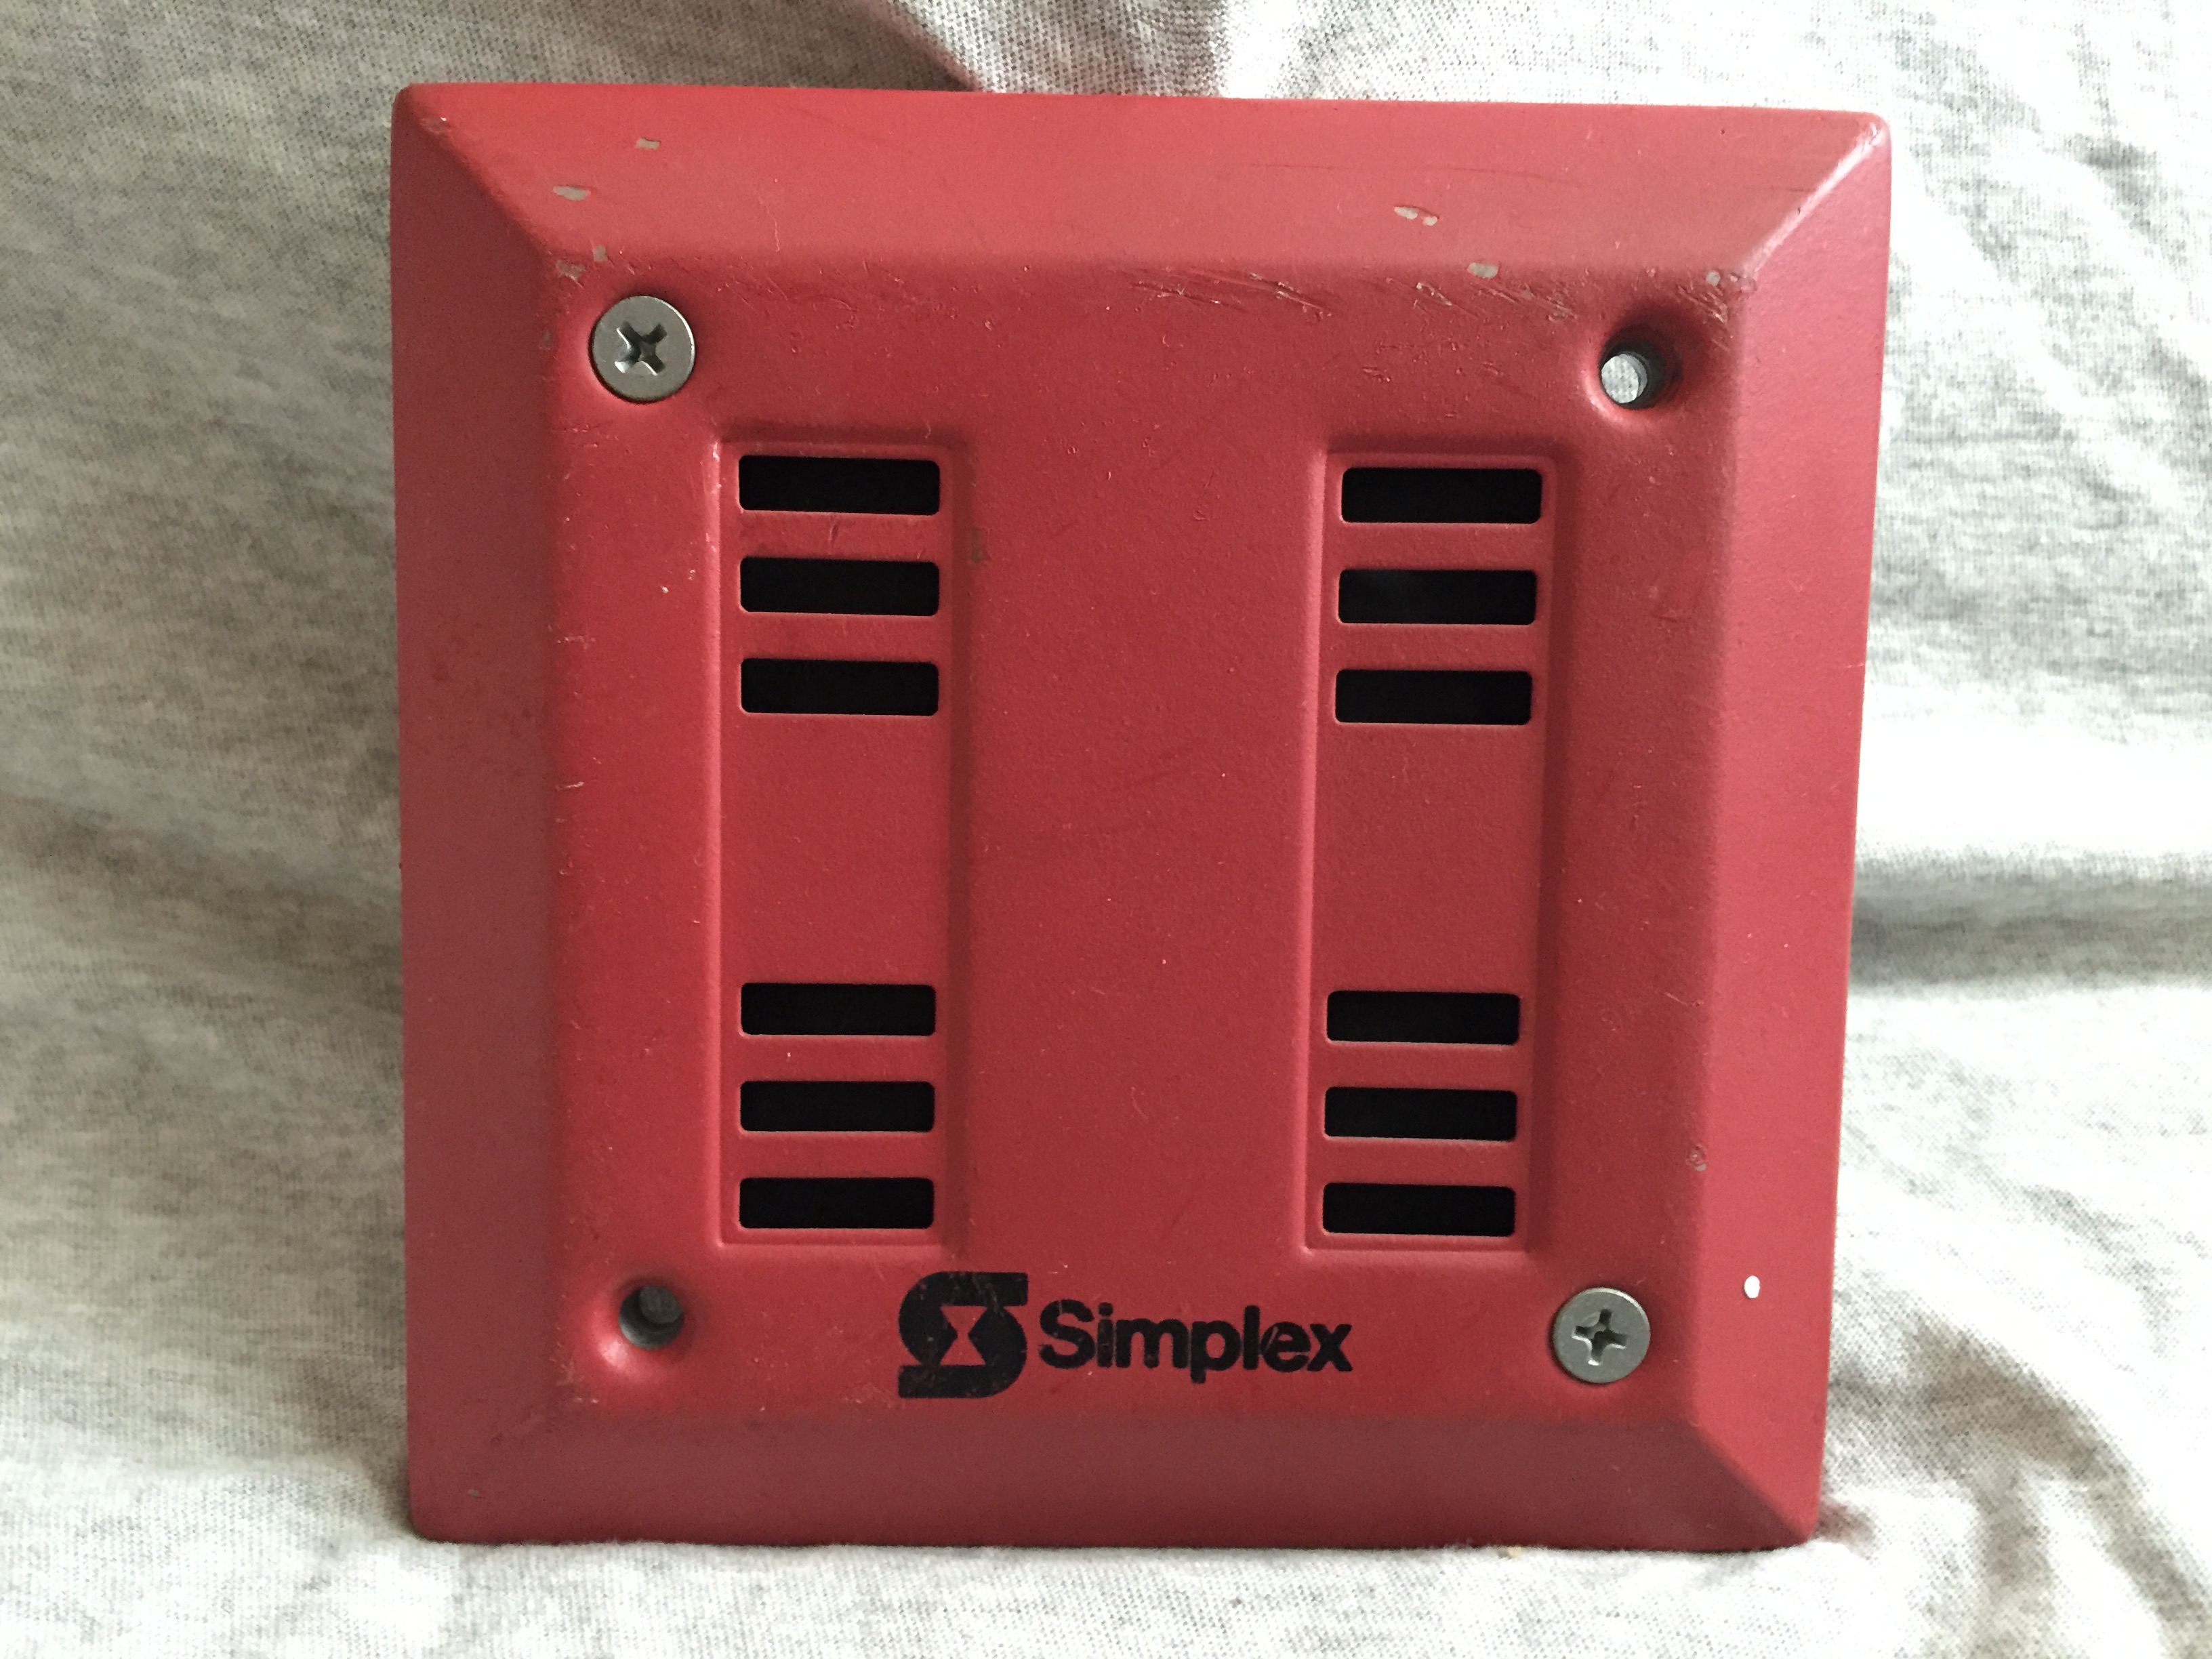 Simplex 2901-9840 - Fire Alarm Collection, Information, Pictures, and ...